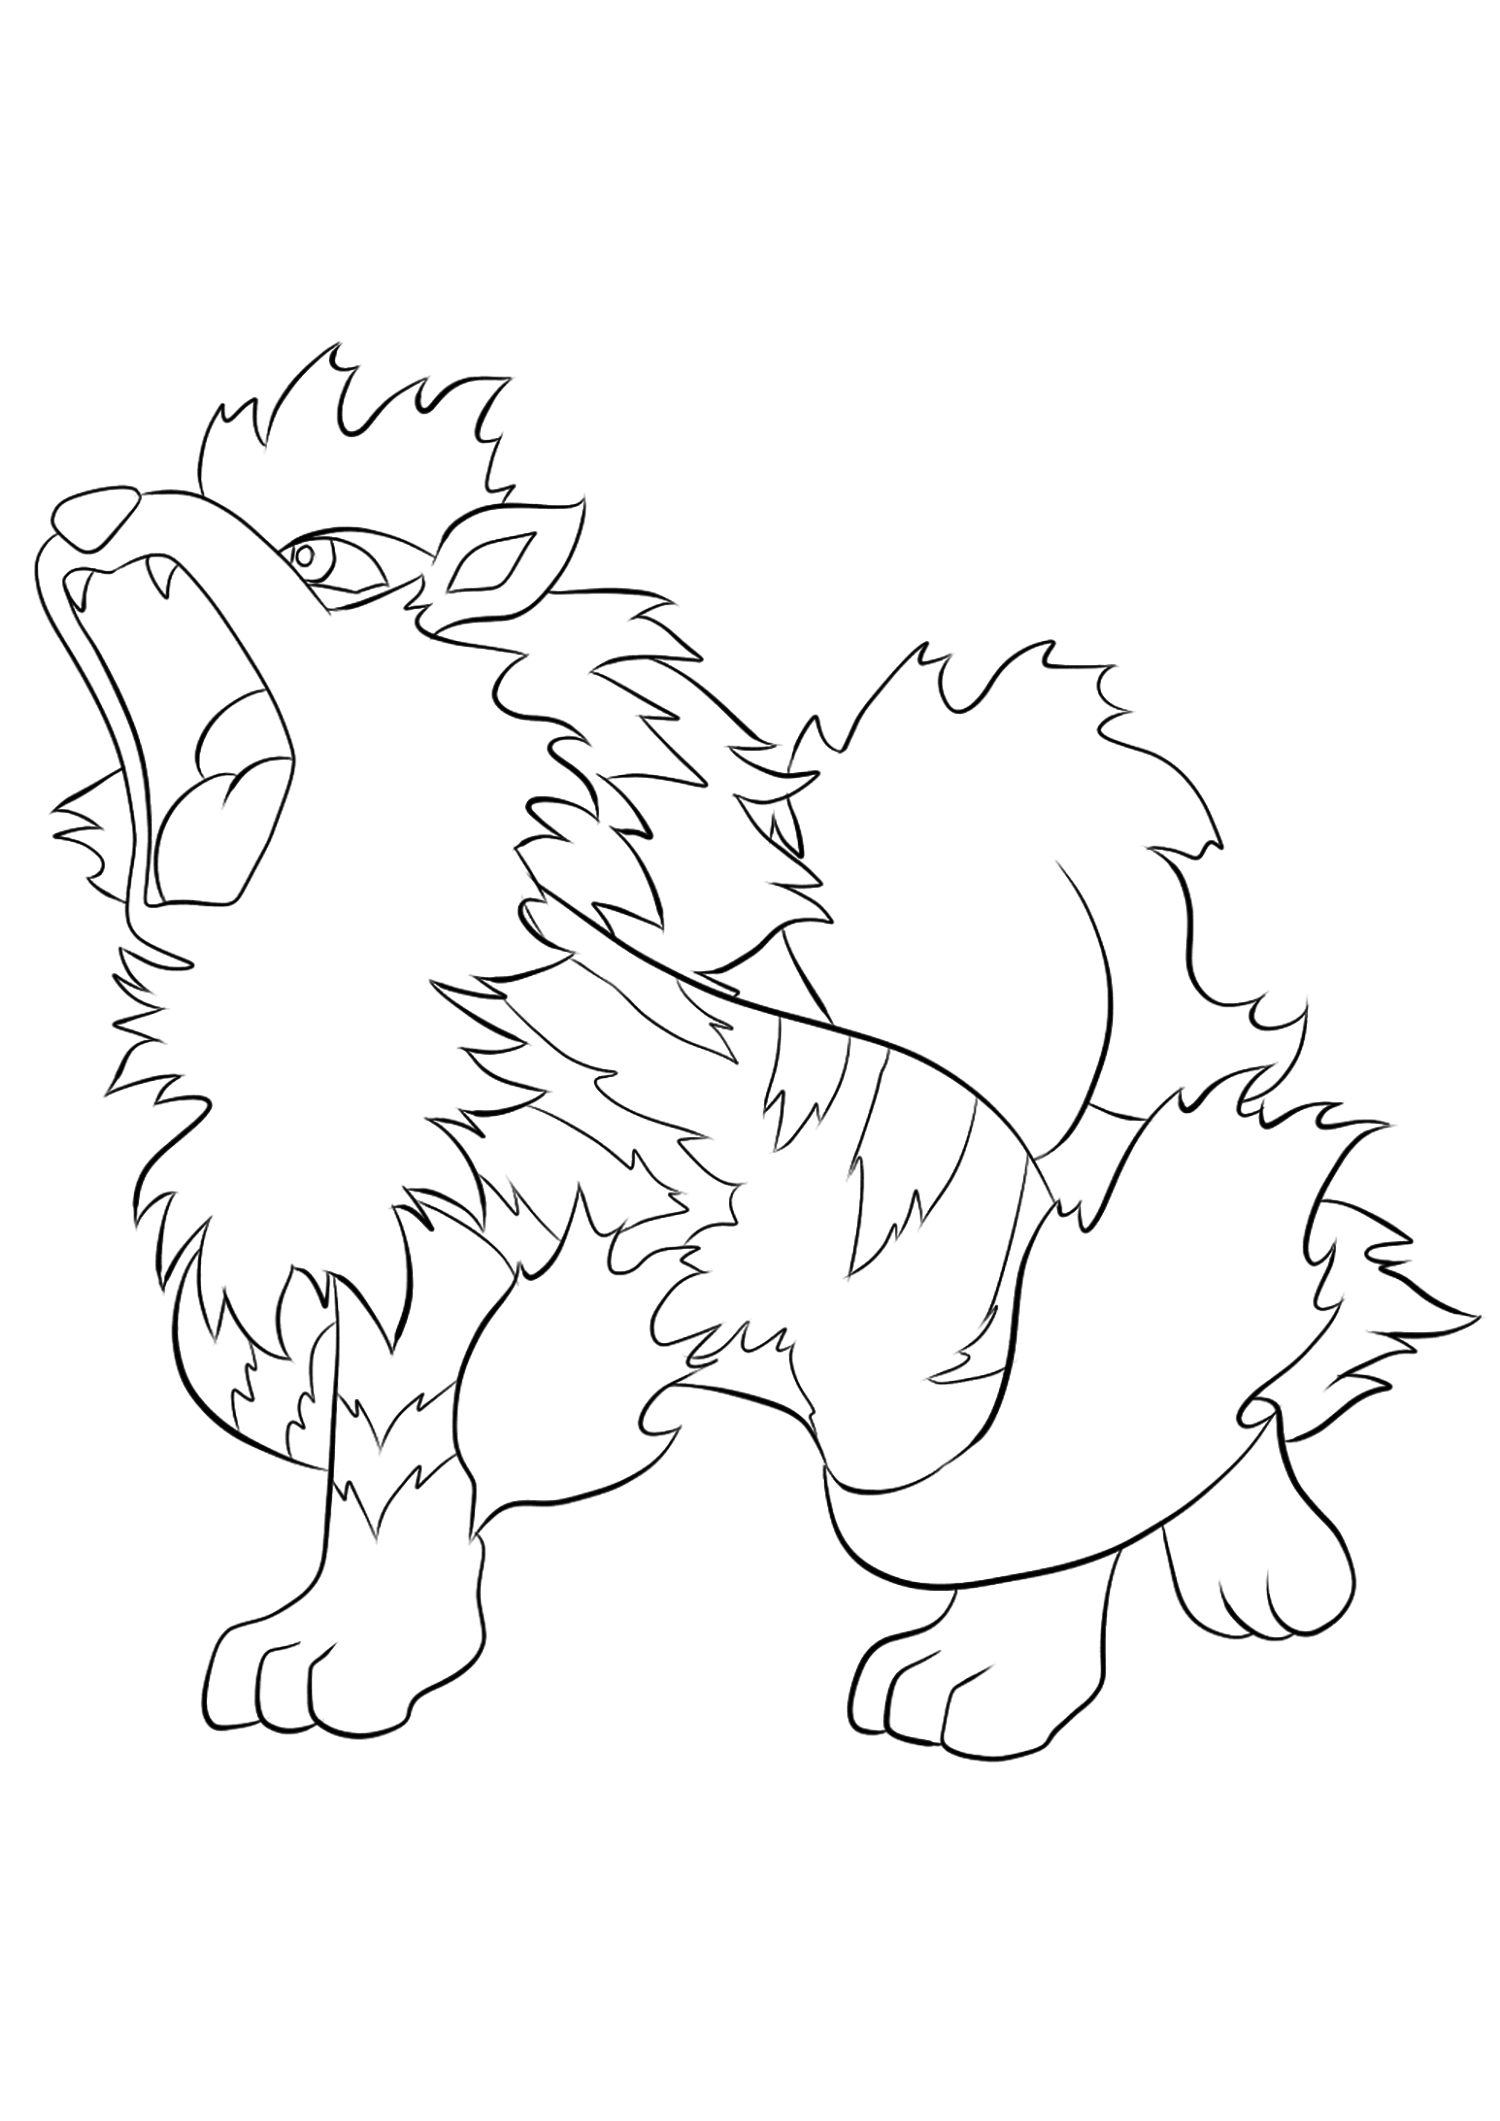 Arcanine (No.59). Arcanine Coloring page, Generation I Pokemon of type FireOriginal image credit: Pokemon linearts by Lilly Gerbil on Deviantart.Permission:  All rights reserved © Pokemon company and Ken Sugimori.